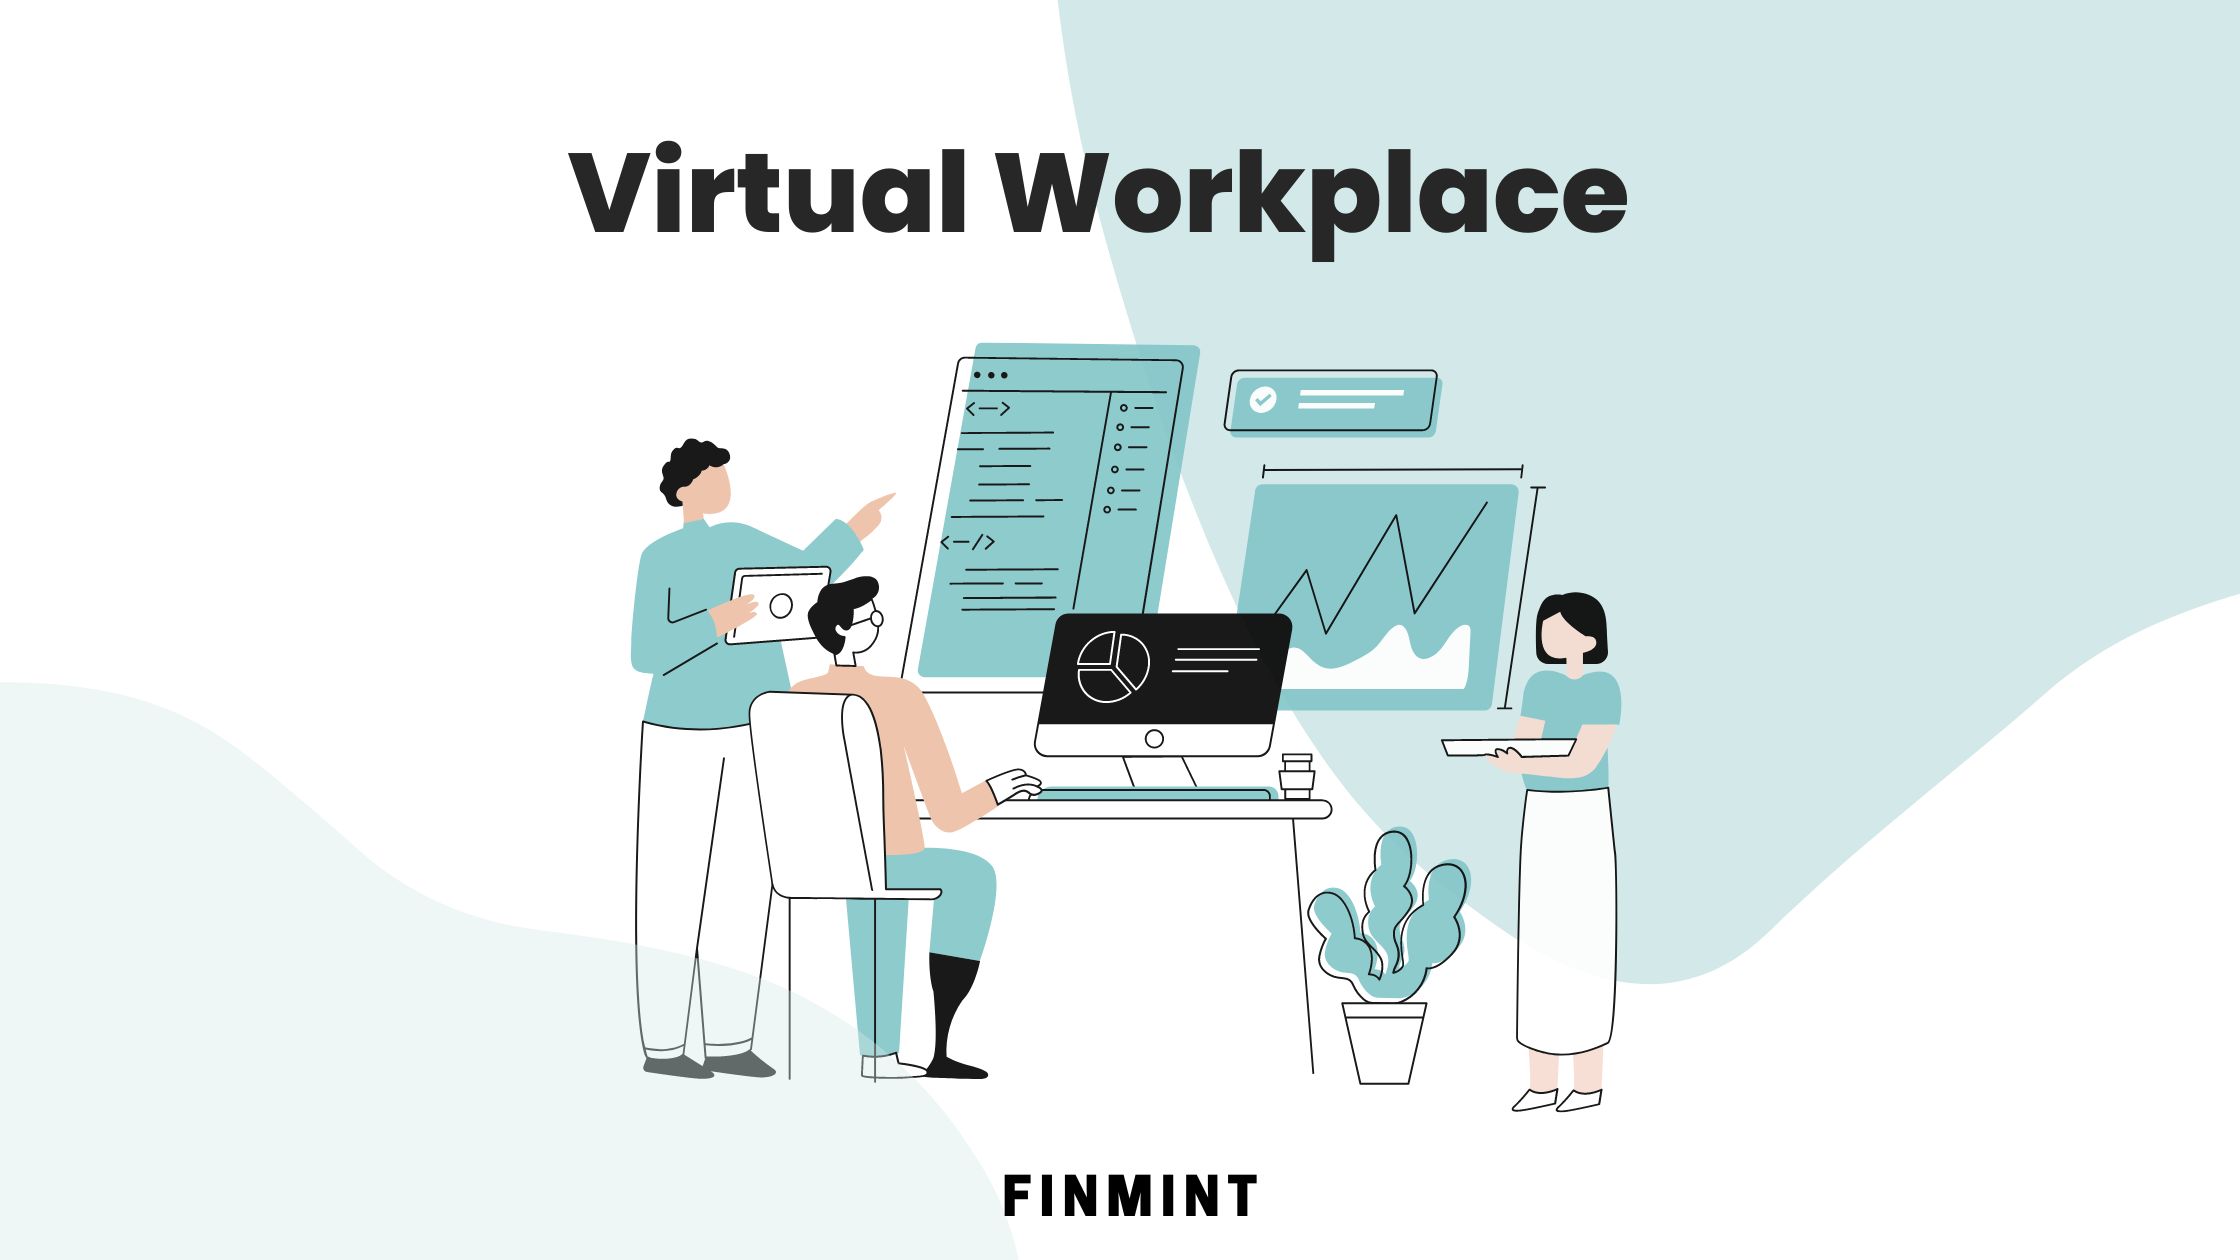 How to Effectively Manage Remote Teams and Virtual Workforces